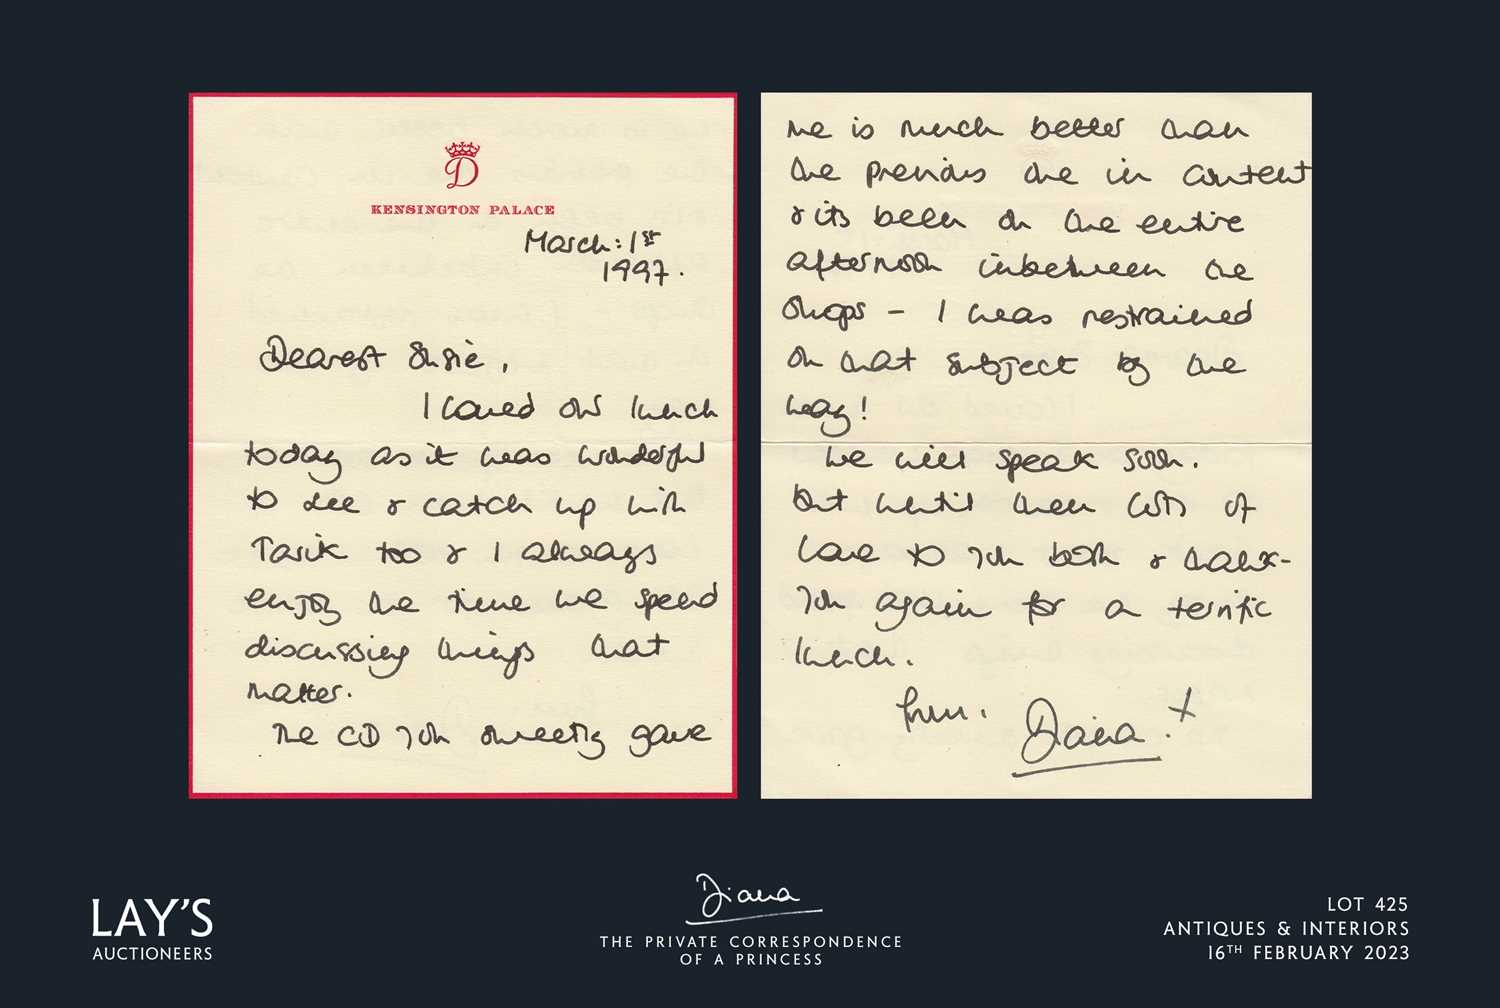 Diana - The Private Correspondence of a Princess A collection of letters and notecards written by Di